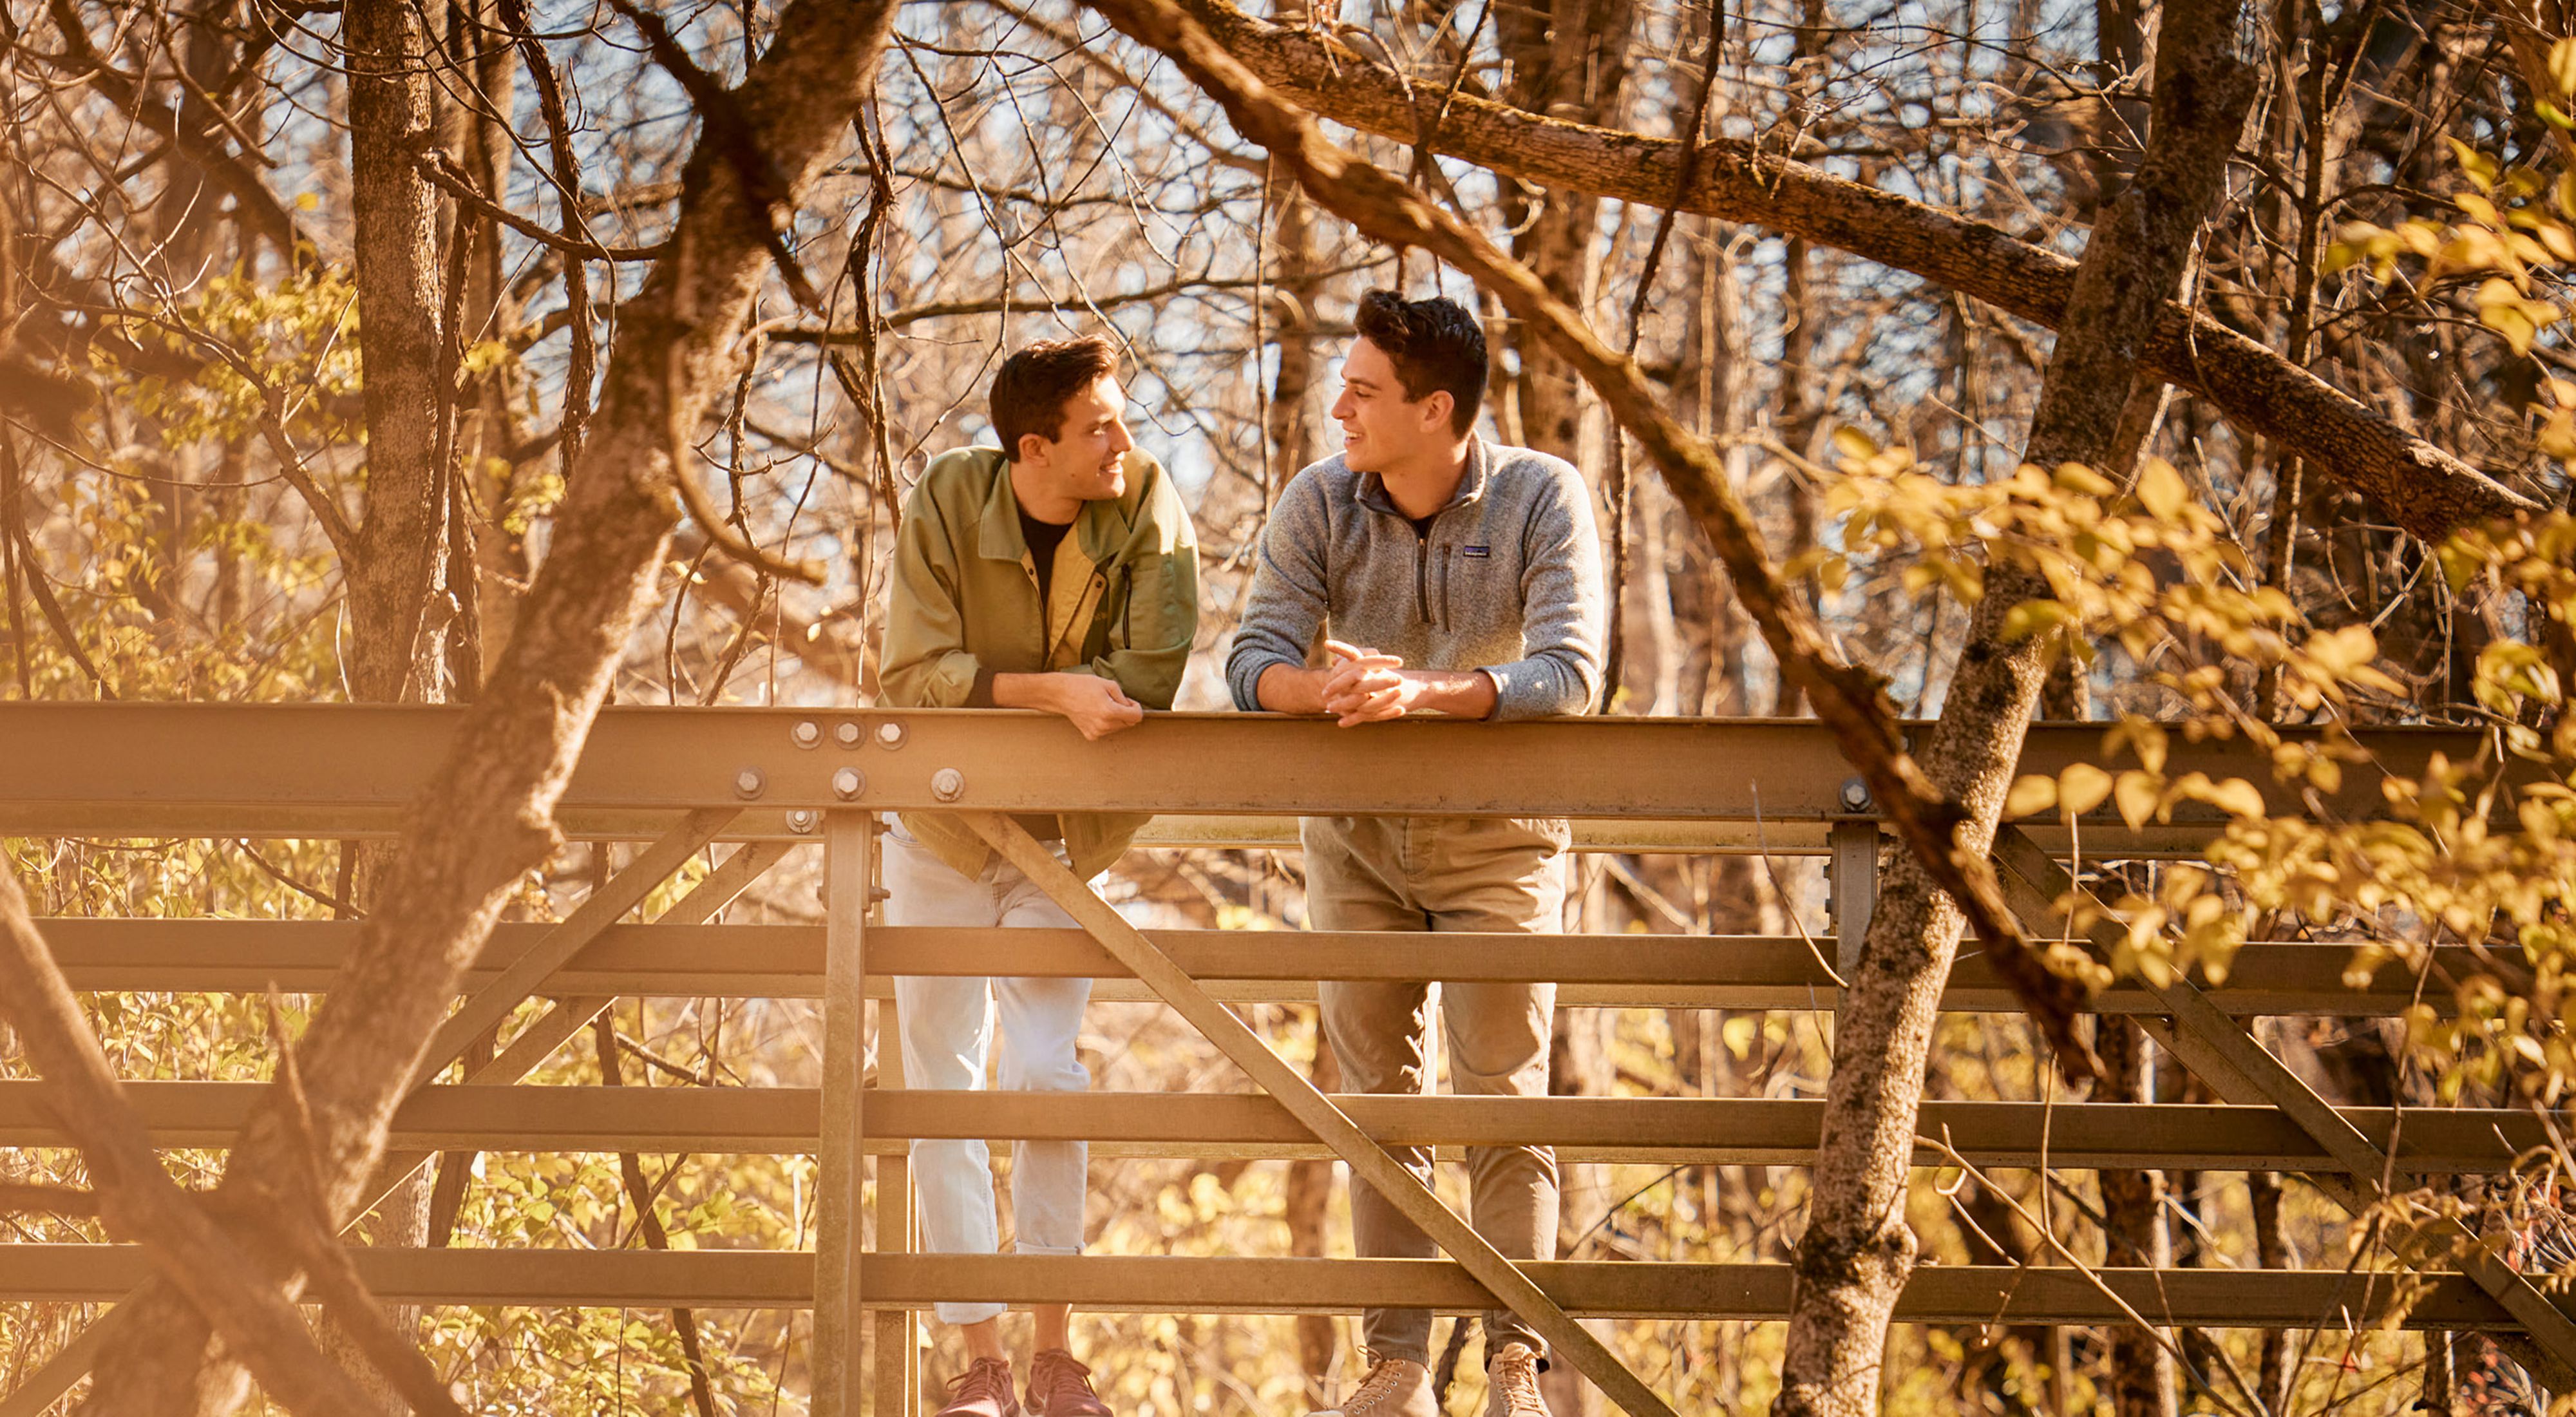 Chad Duplain stands with partner Matthew on bridge over stream at Big Darby Headwaters Nature Preserve.